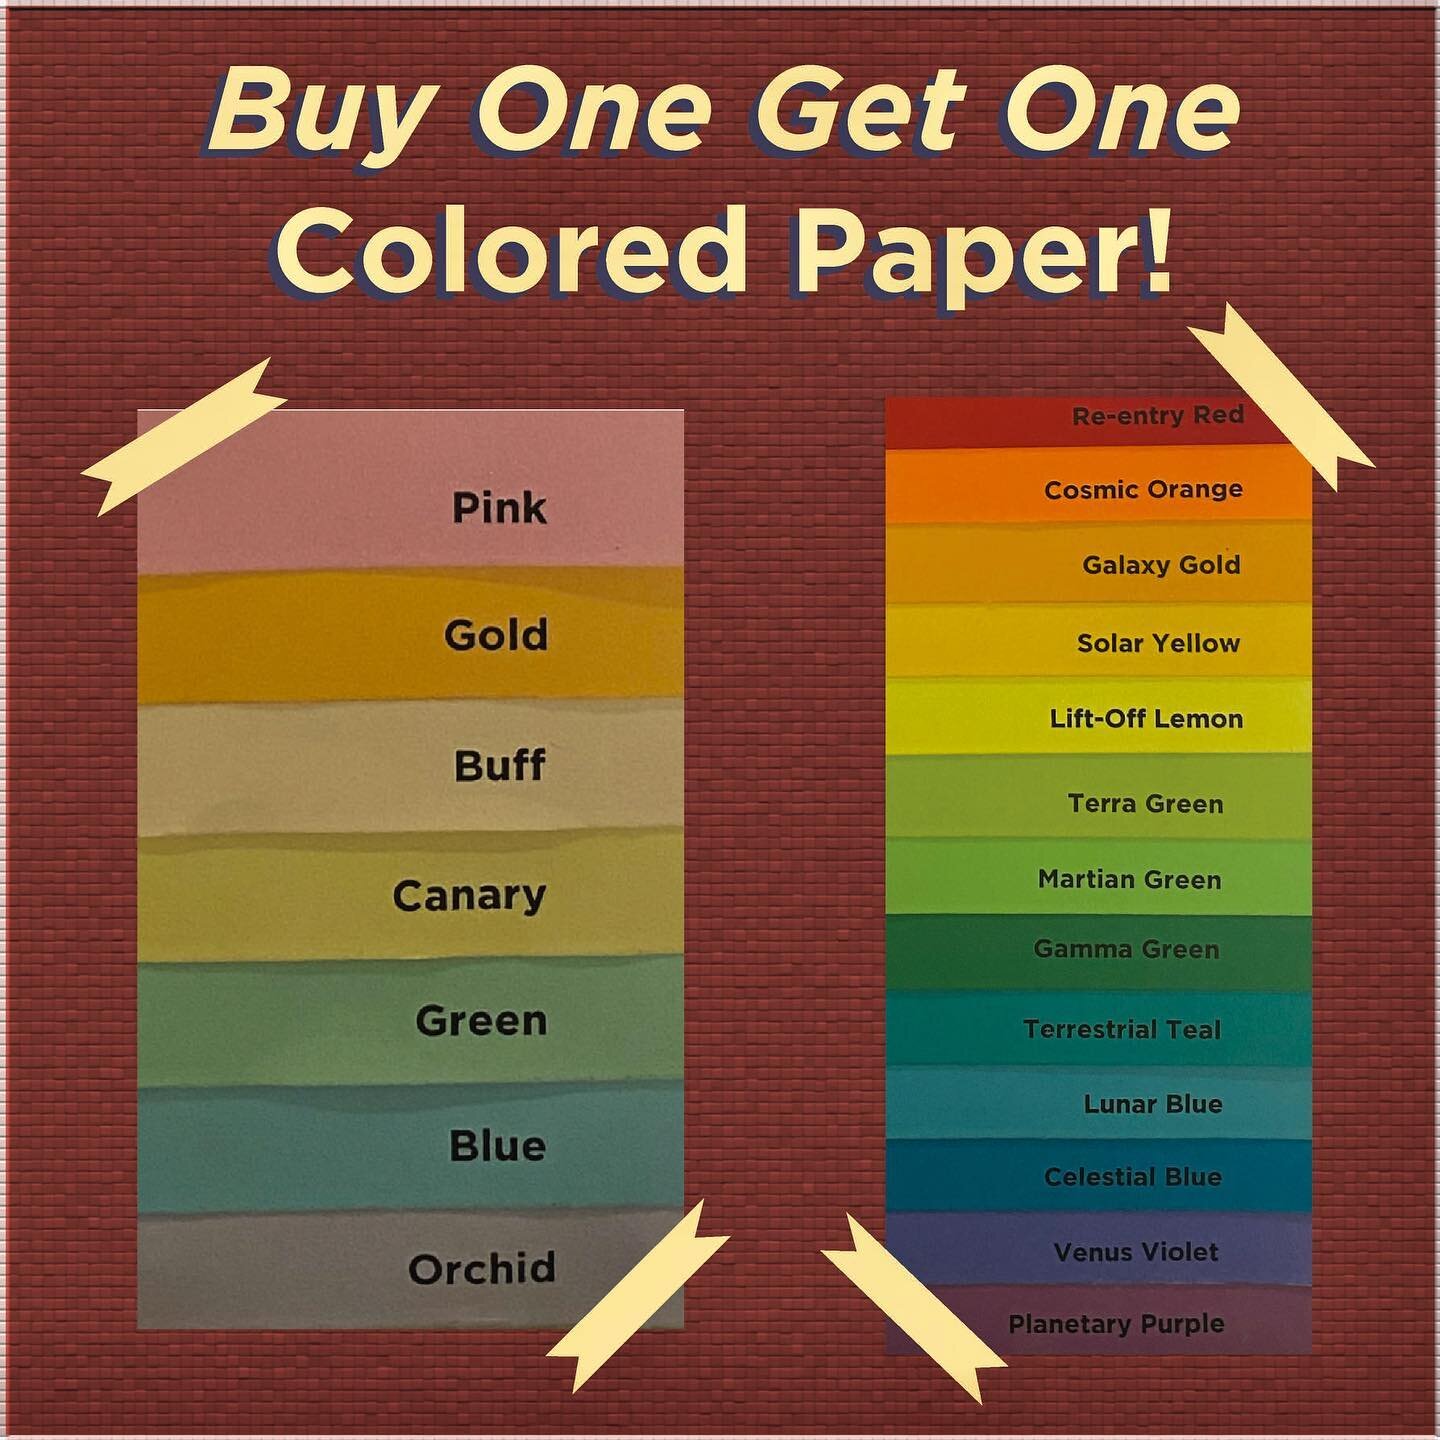 Hi! Looking for colorful paper for an org or any assignment sheet to go along with the spring season?

We&rsquo;re offering a special Buy One Get One deal on our colored paper. You can mix and match any of our colored paper. This is a limited time de